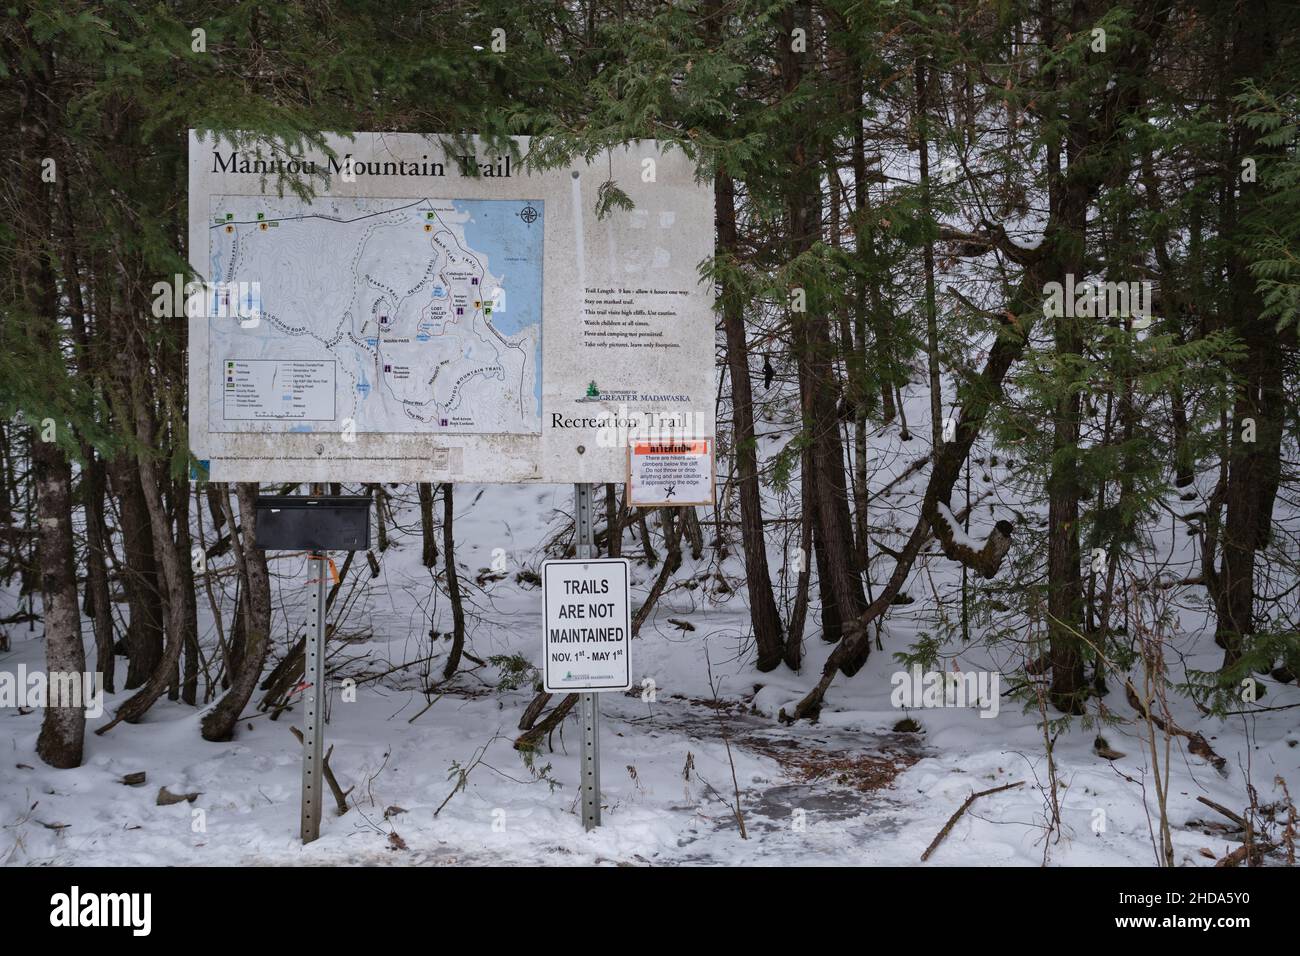 CALABOGIE, ONTARIO, CANADA - 1/2/2022: A large signboard with a map of the Manitou Mountain Trail network at a trailhead for the Eagle's Nest Trail. Stock Photo